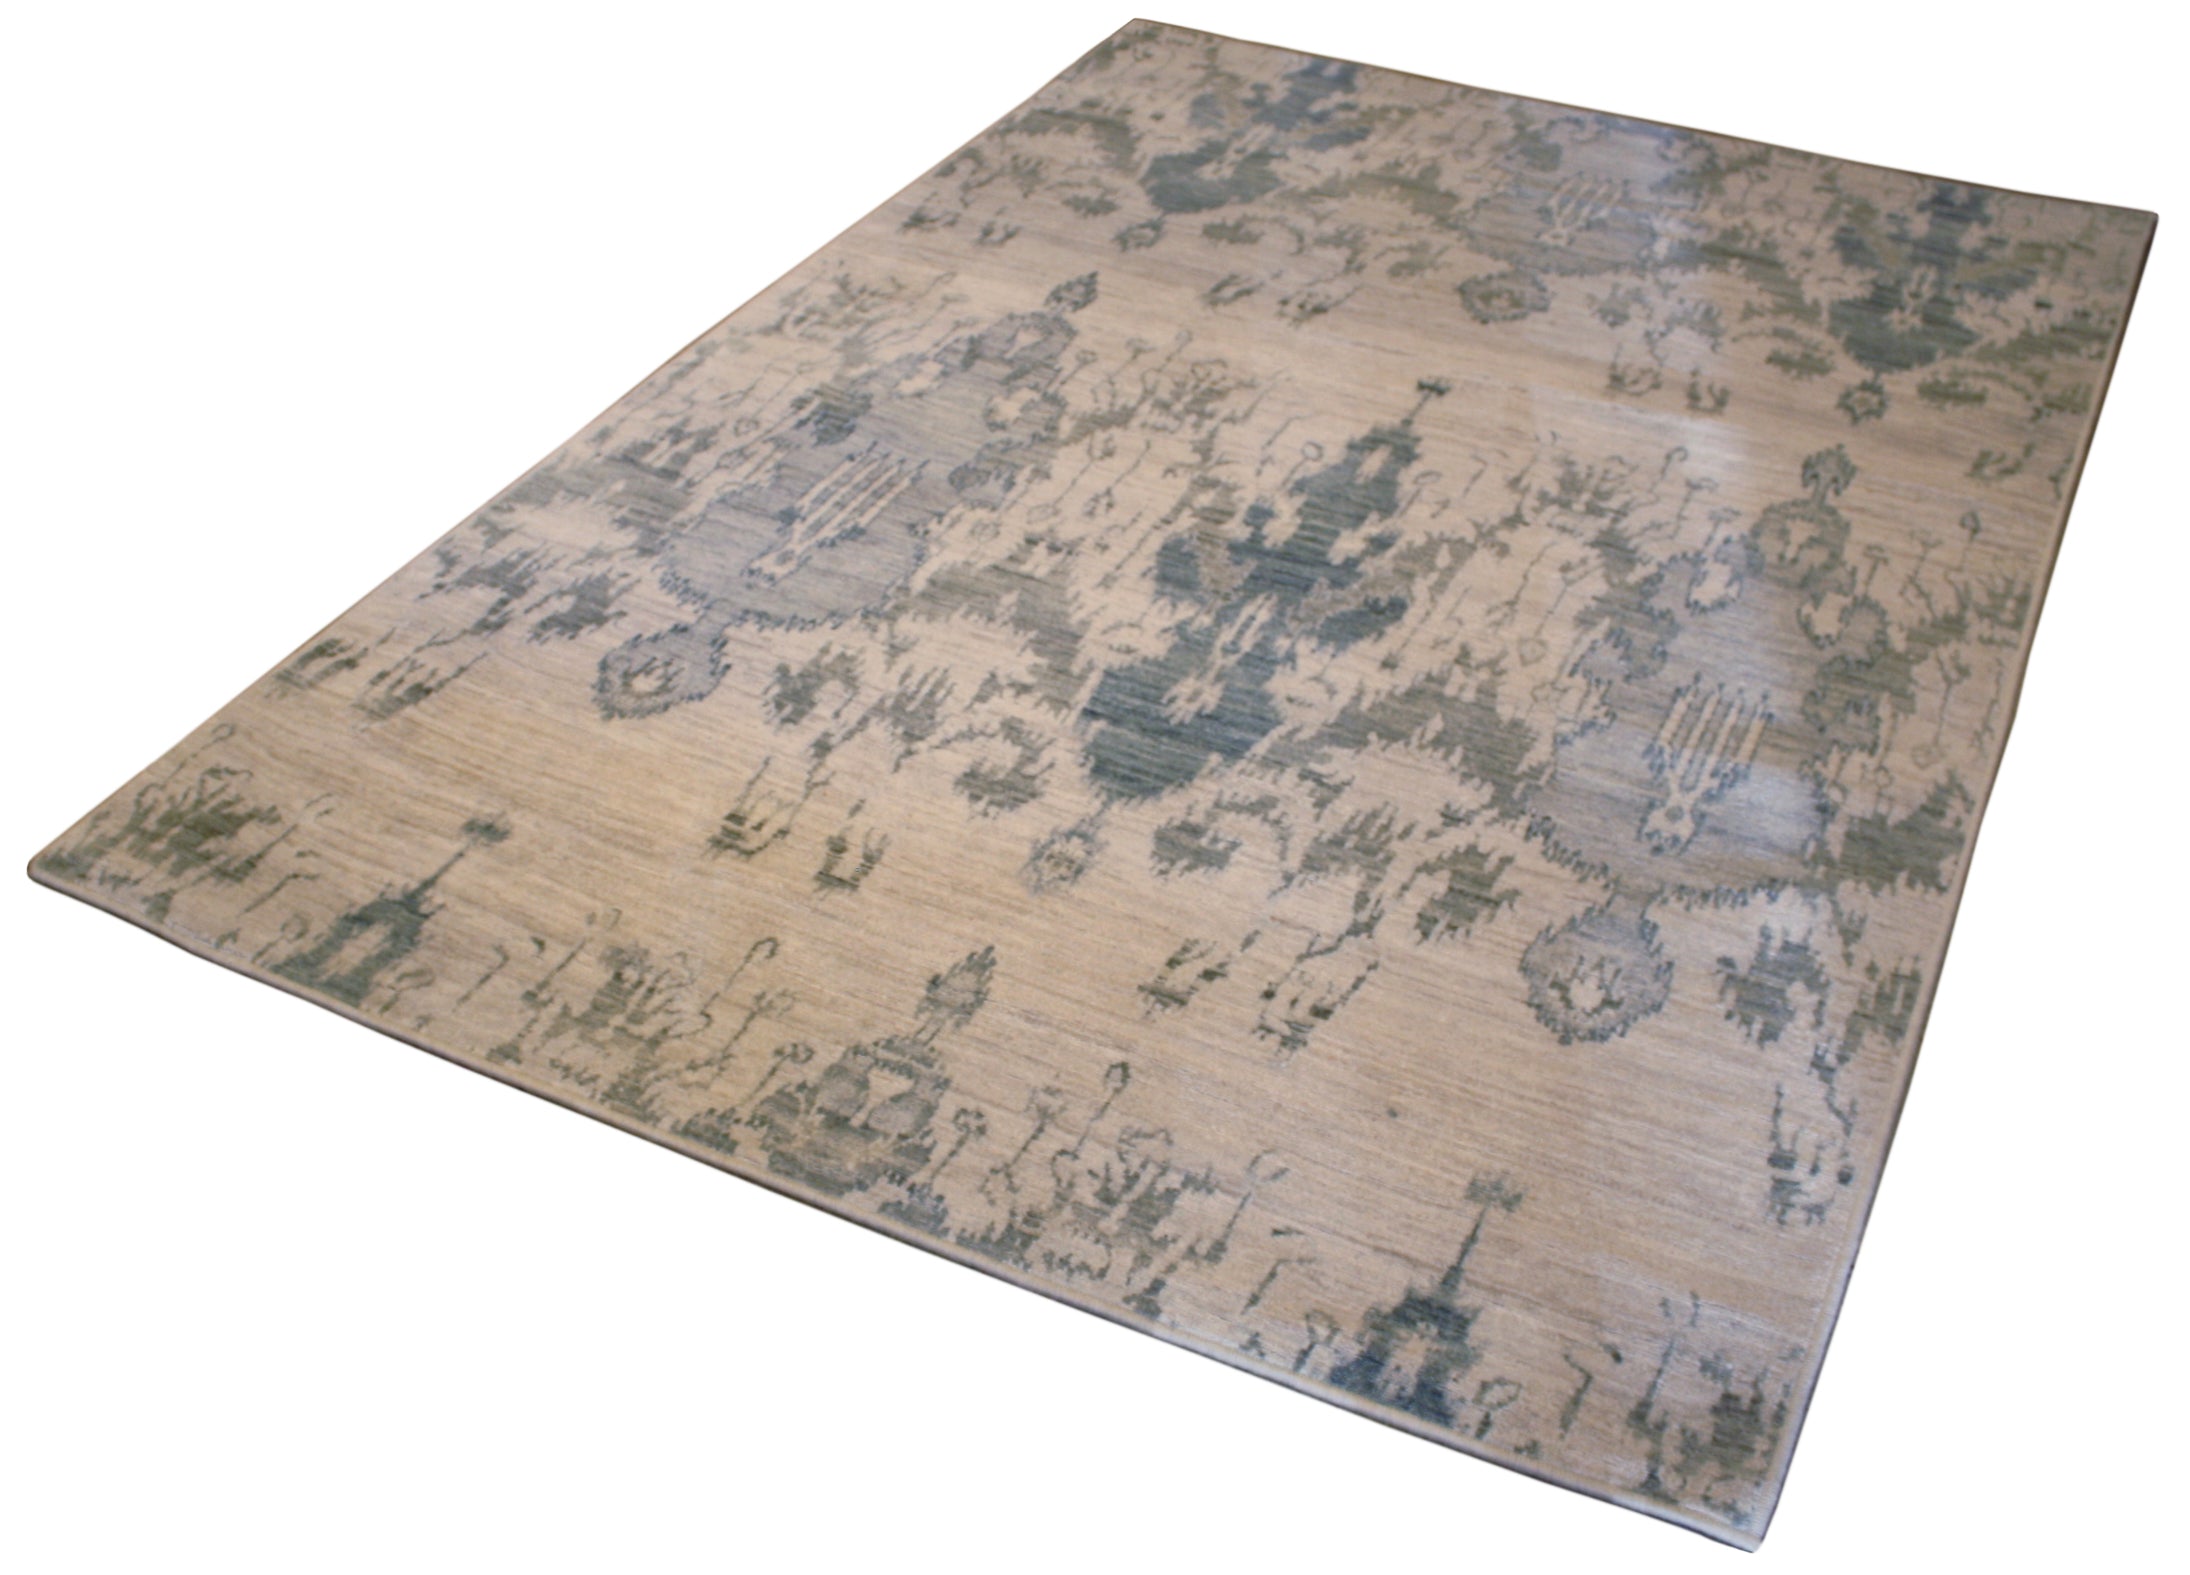 8x10 transitional area rug resized to 5x7